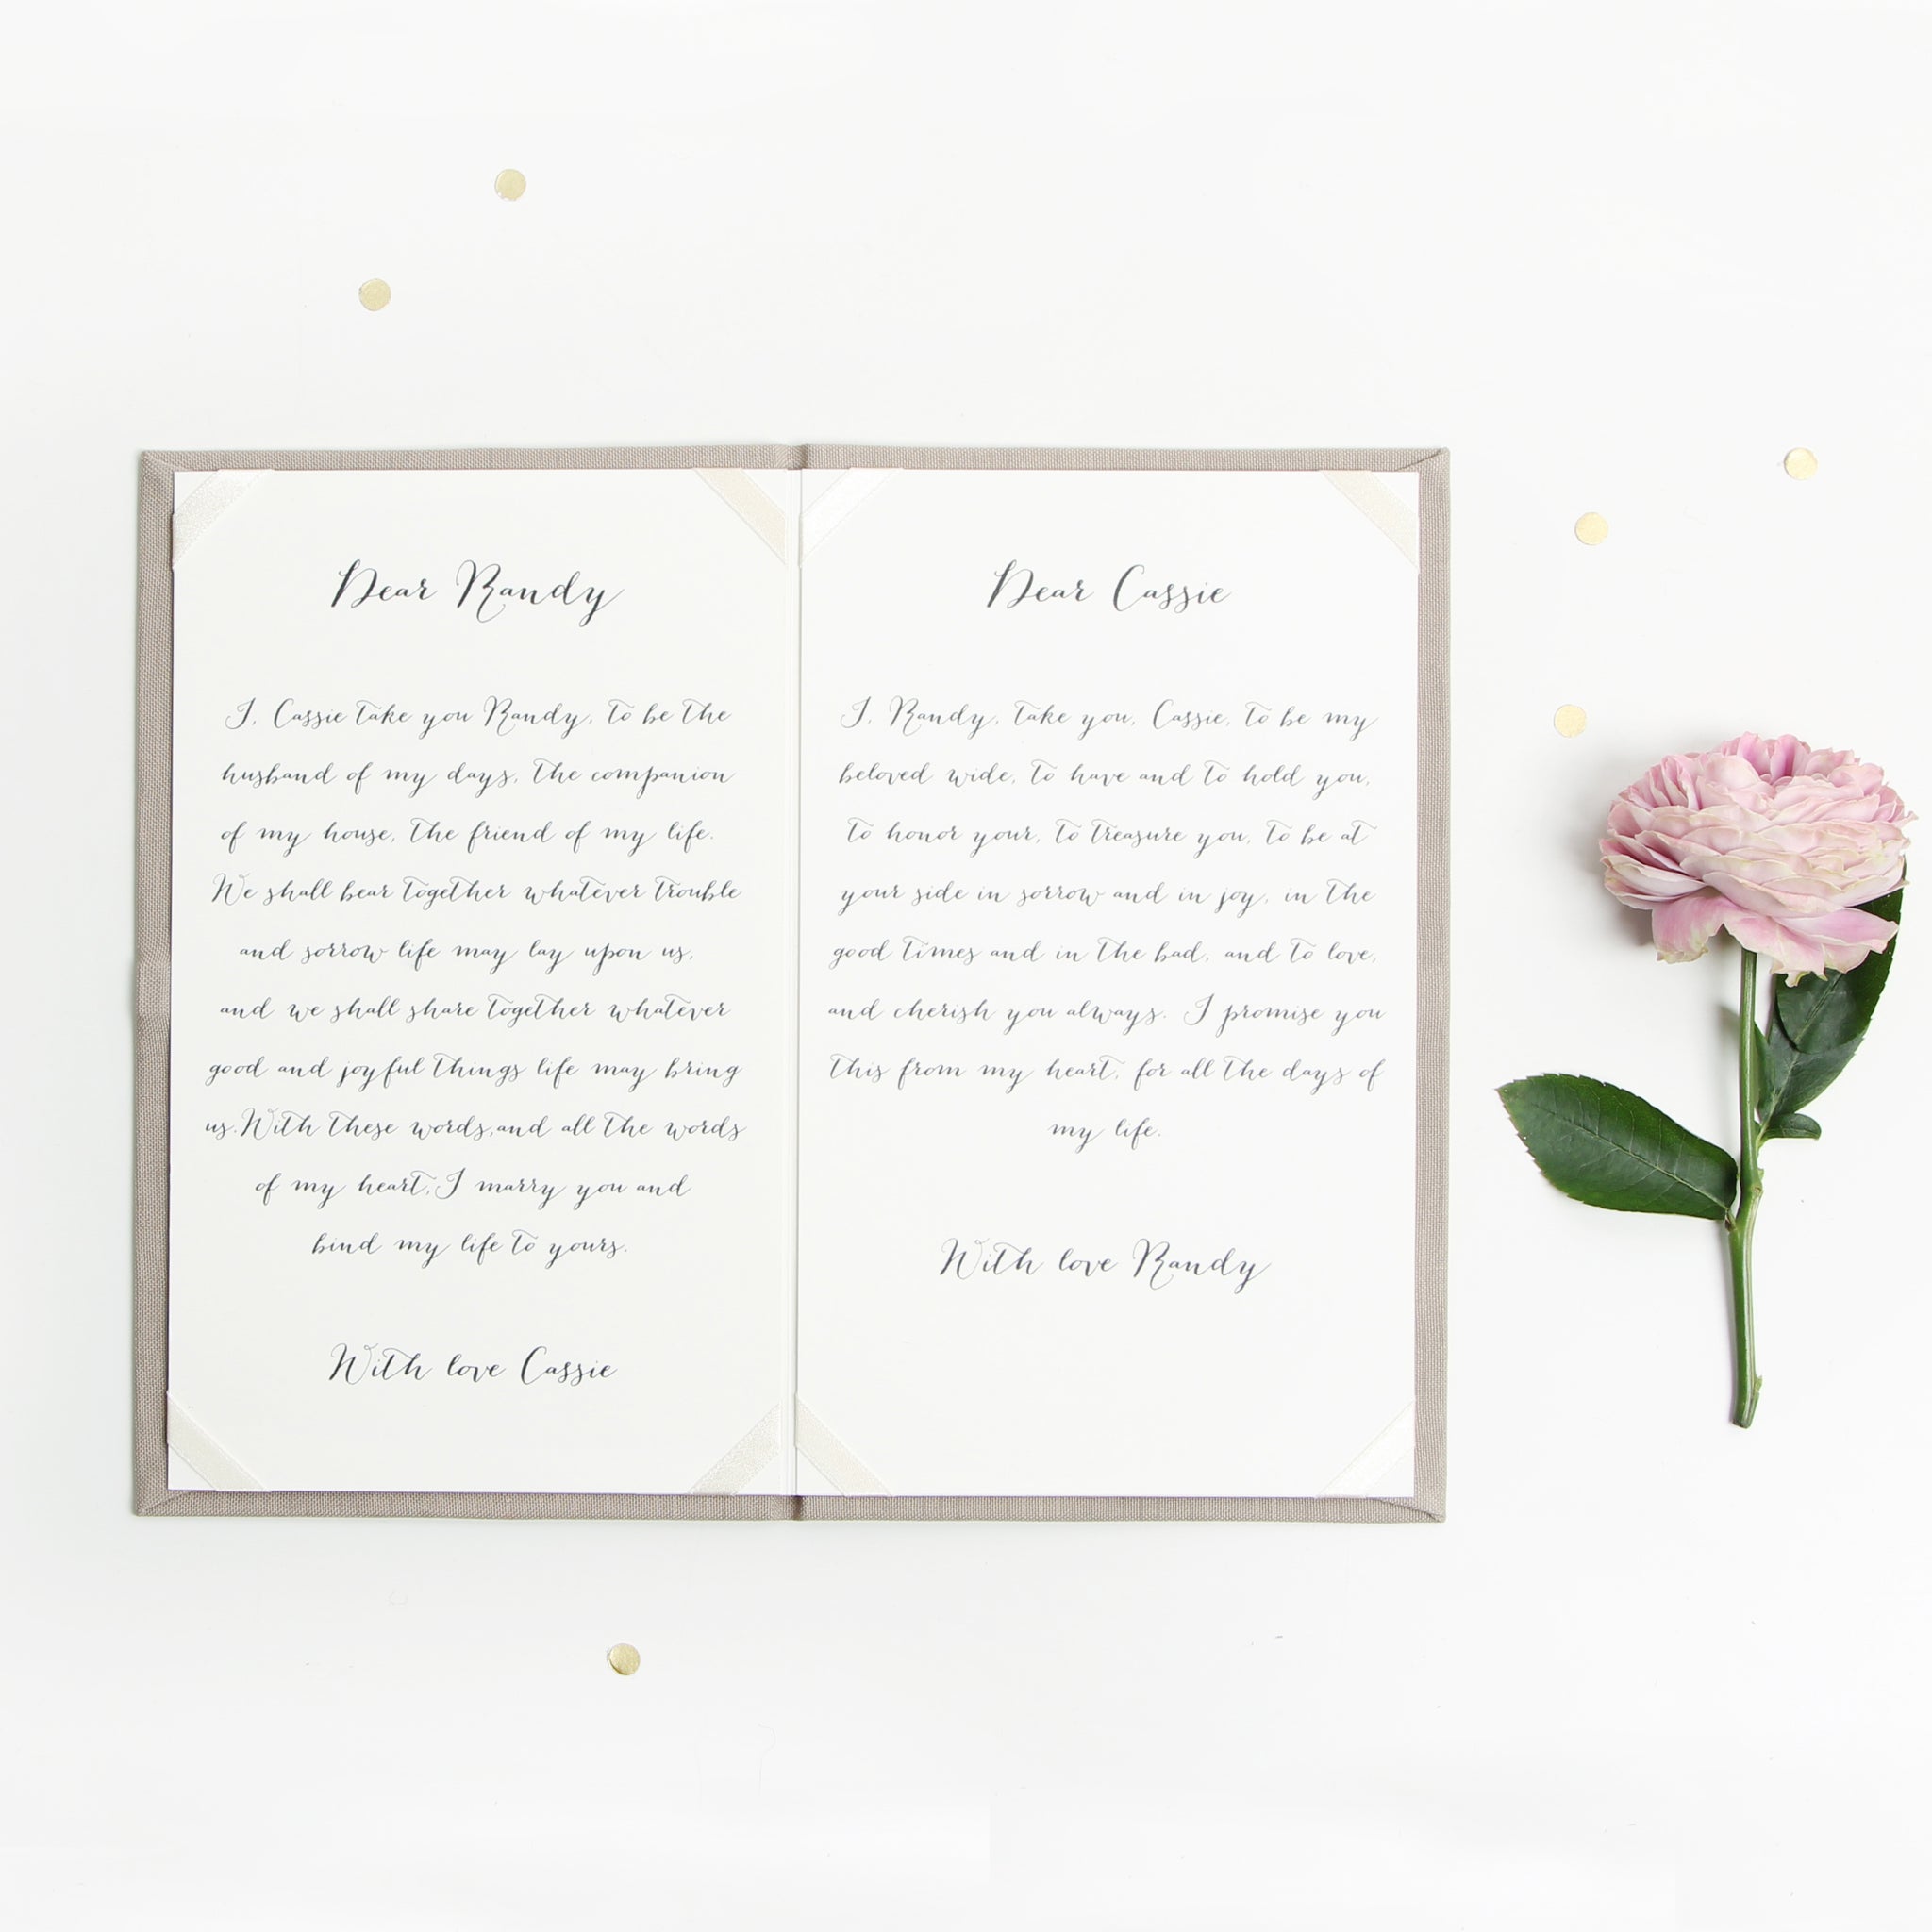 Personalised Wedding Vow Books White Velour Latte Keepsake Calligraphy Vows Bride and Groom Ceremony - Liumy 